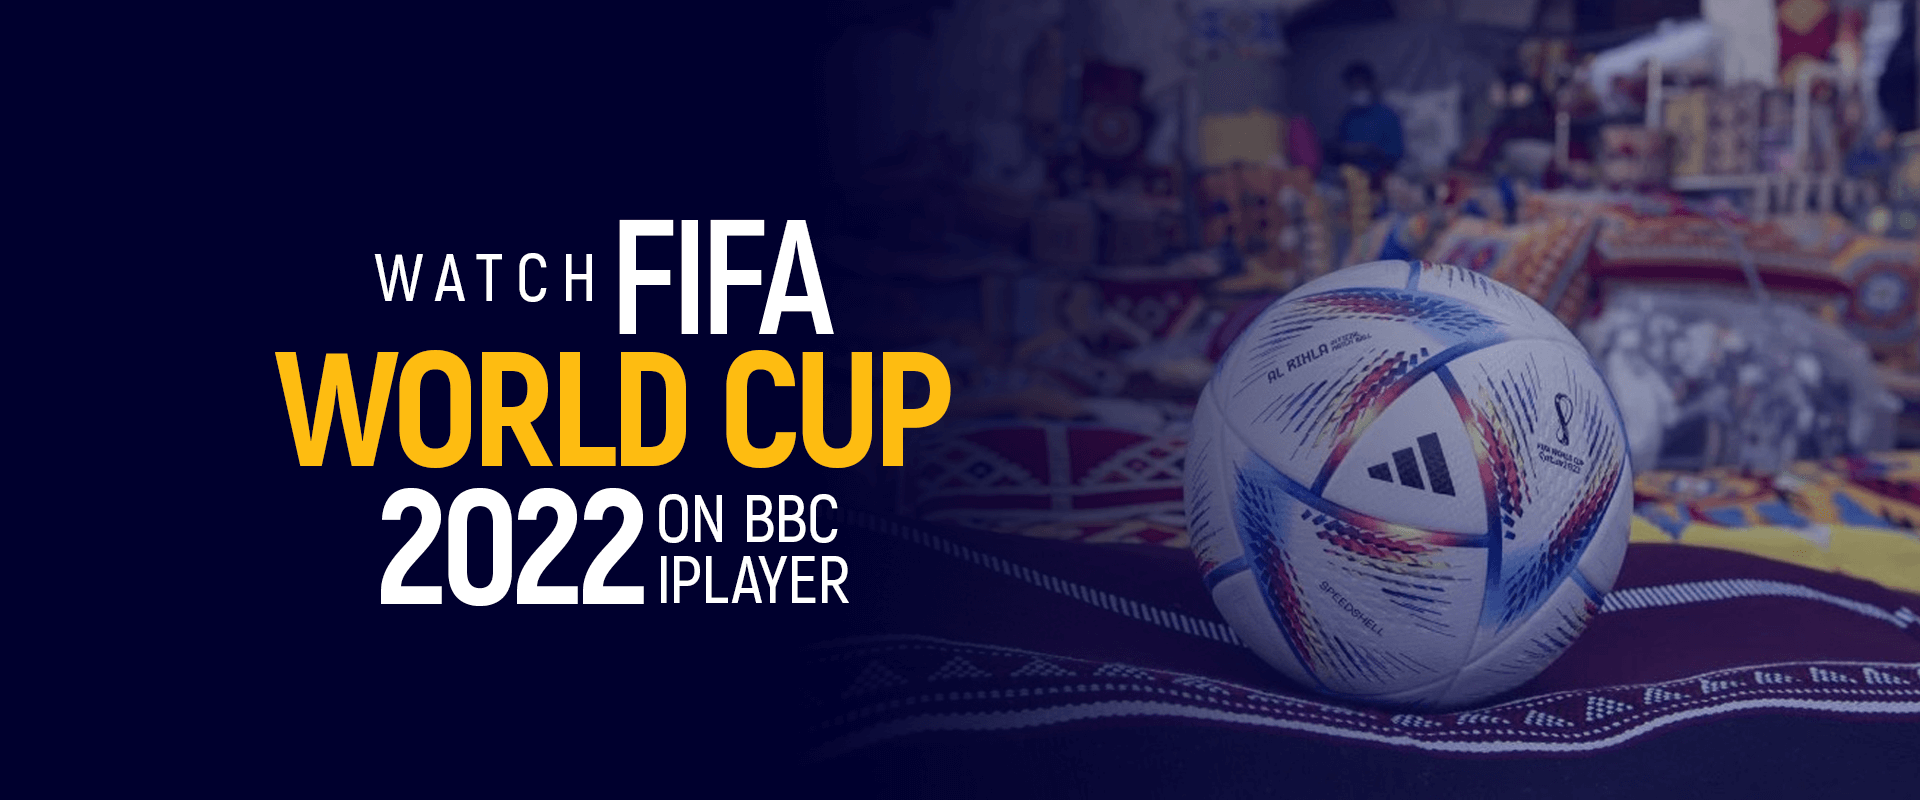 How to Watch FIFA World CUP 2022 on BBC iPlayer